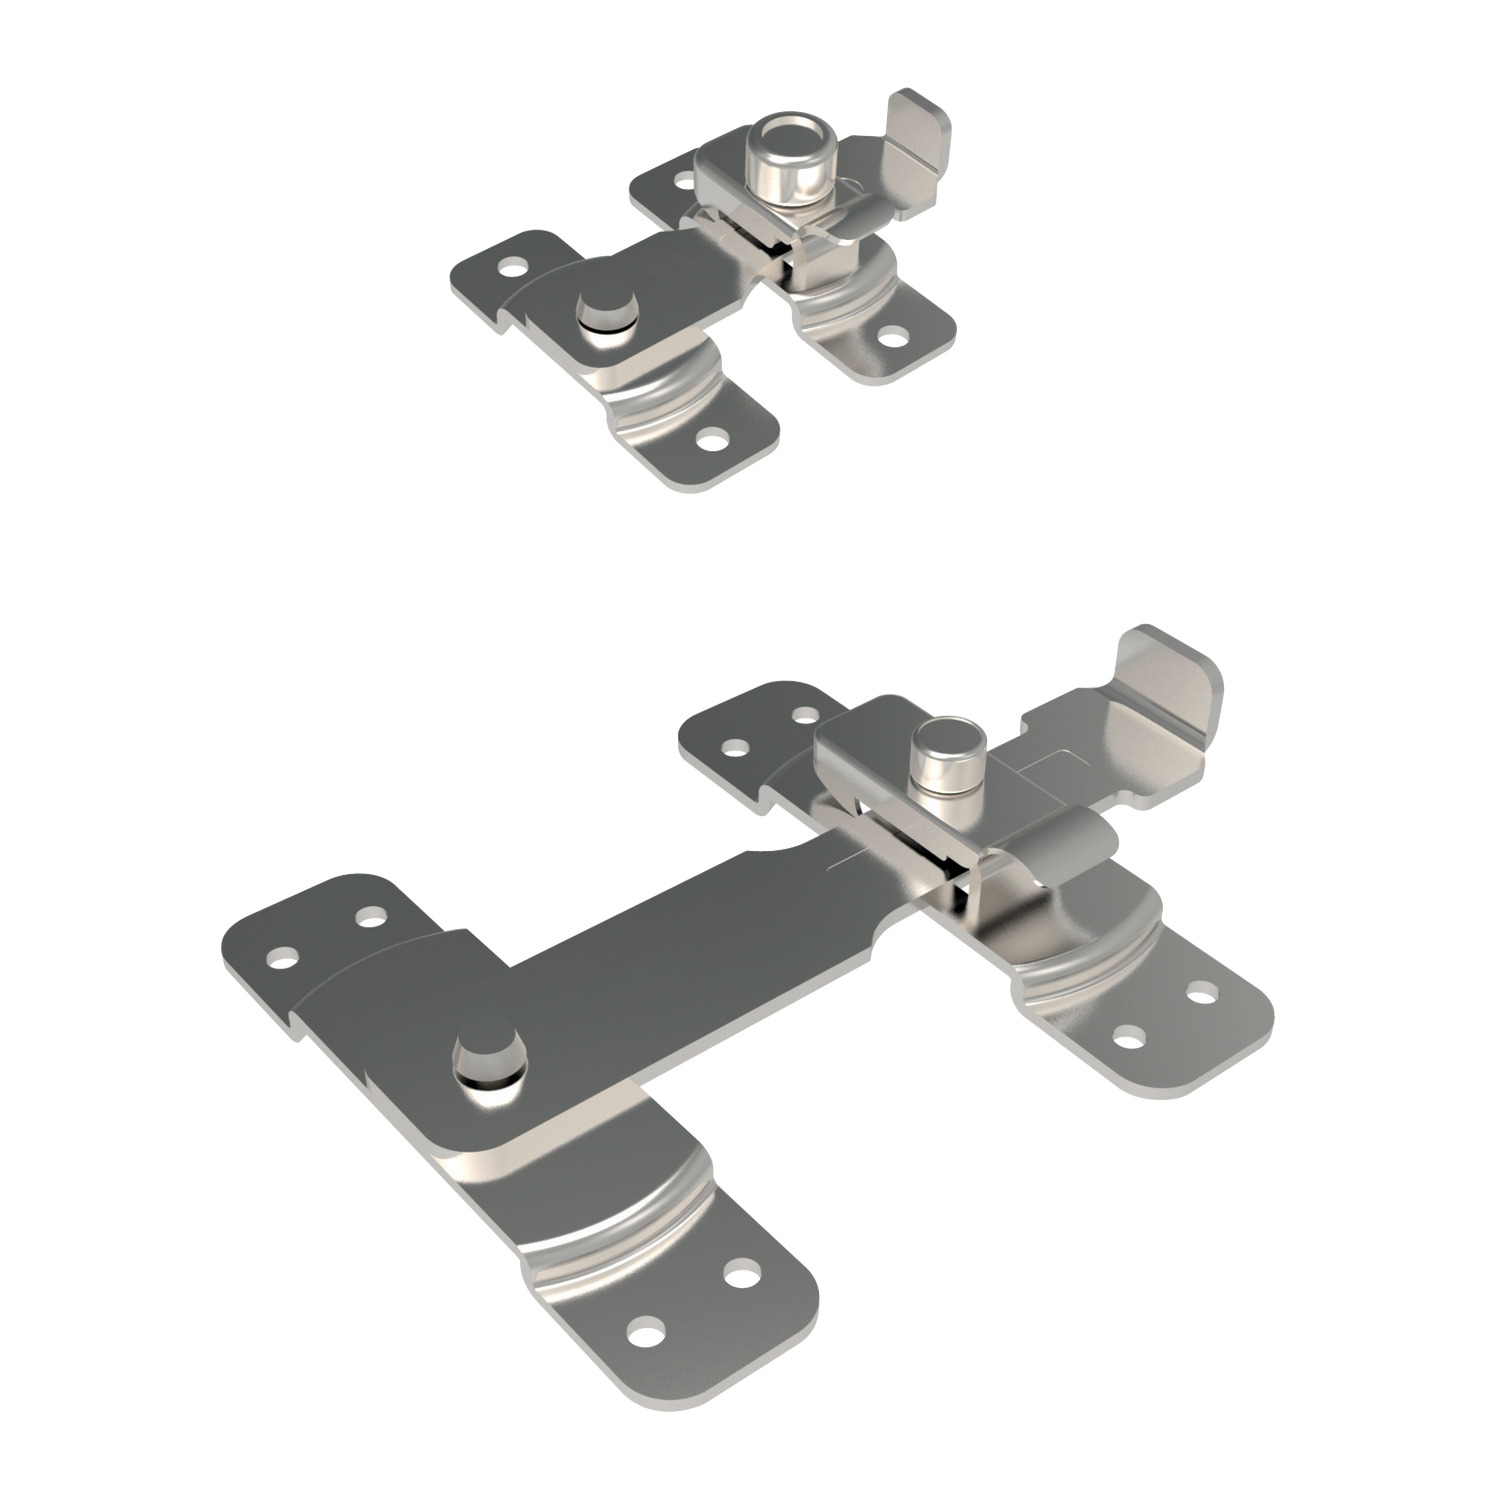 J6240.AC0100 Bar Latches Stainless Steel Spring loaded. 105 x 80